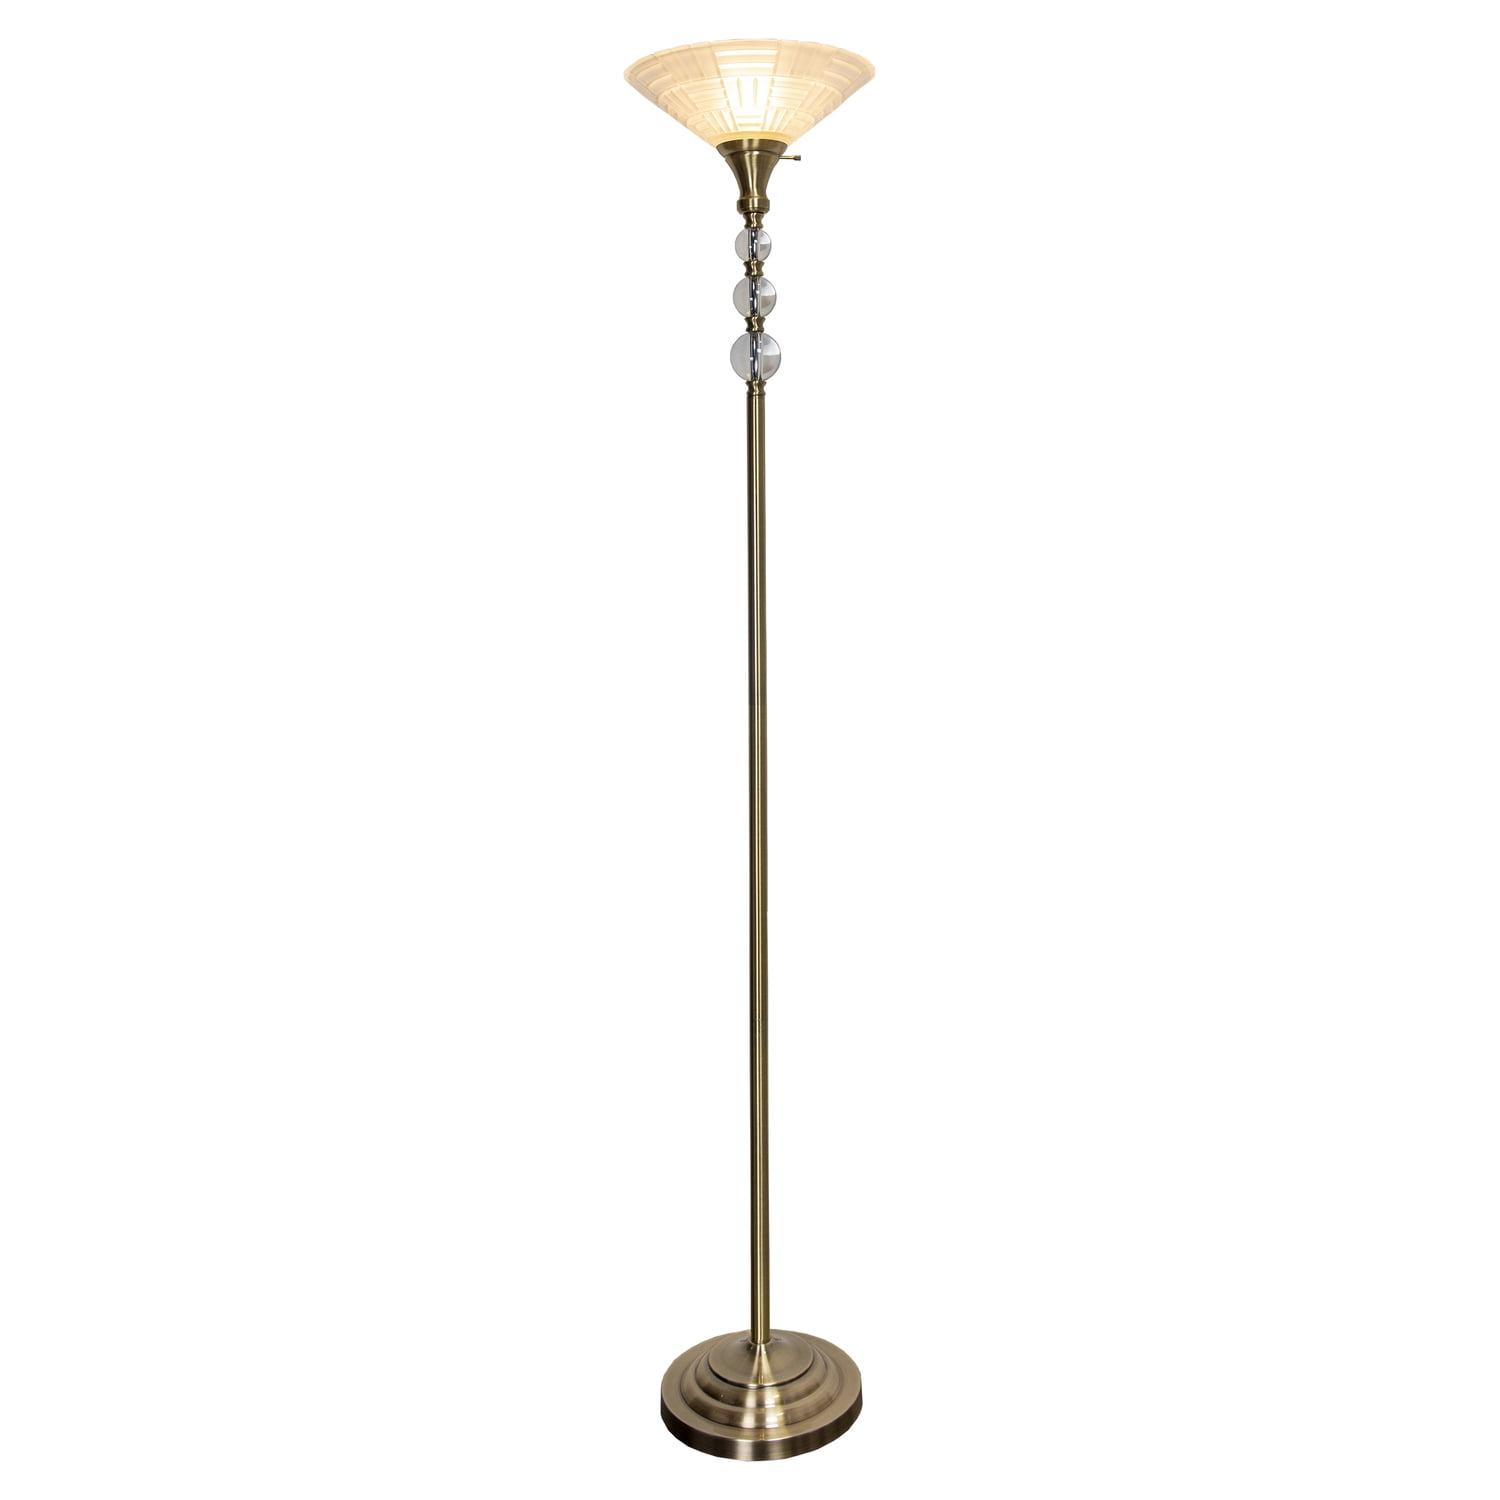 Elegant Antique Brass Torchiere Floor Lamp with Stained Glass